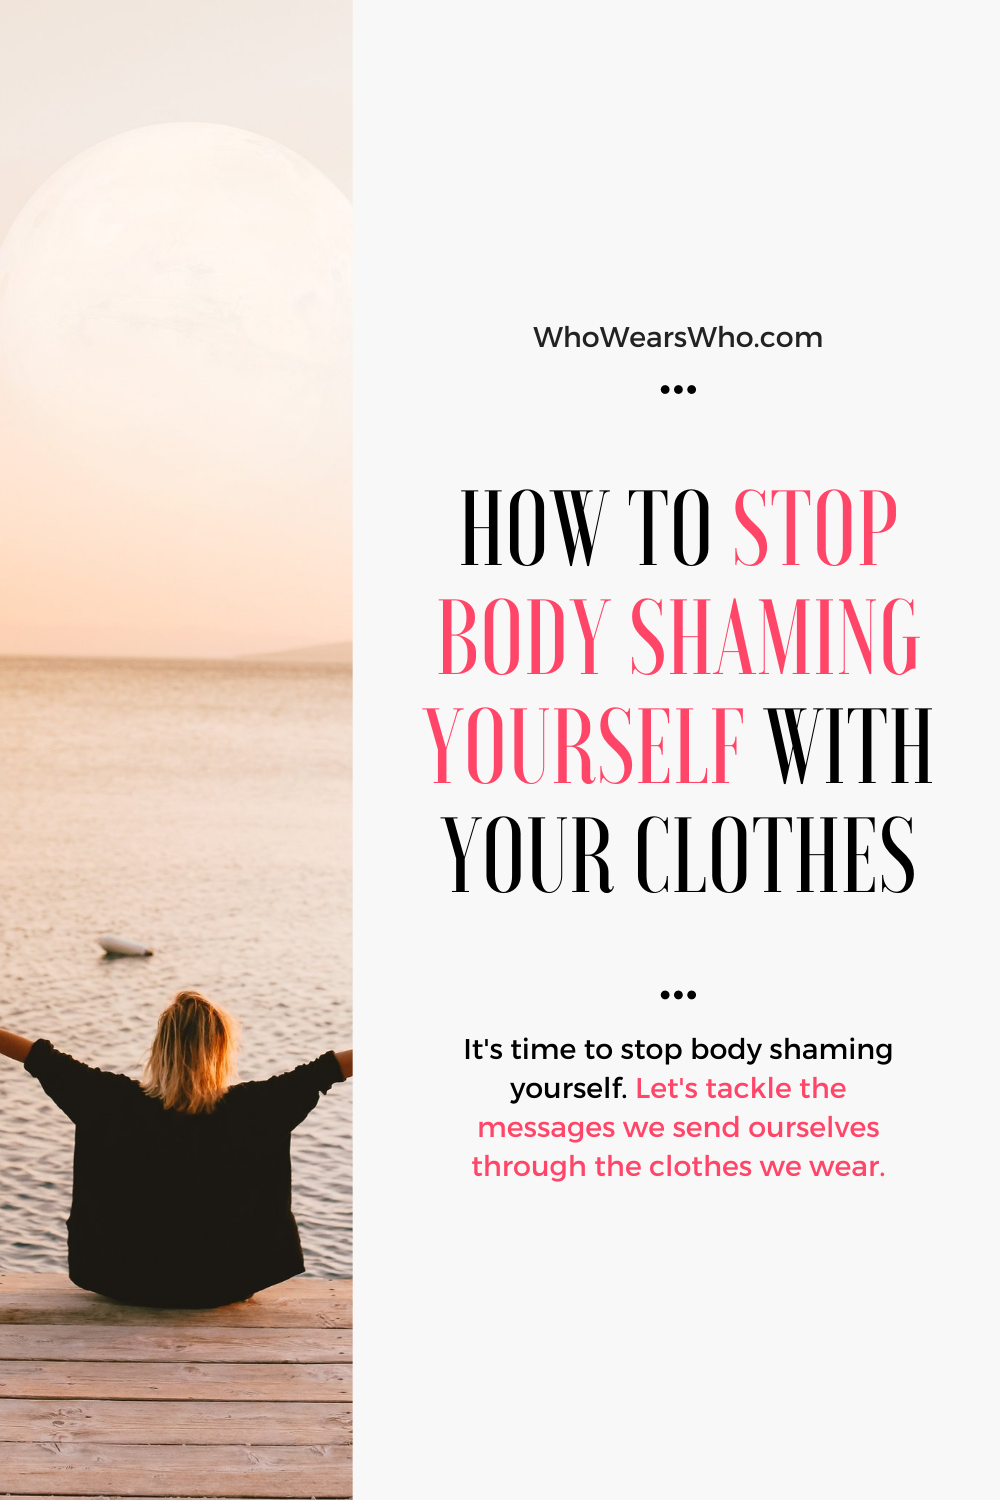 How to stop body shaming yourself with your clothes